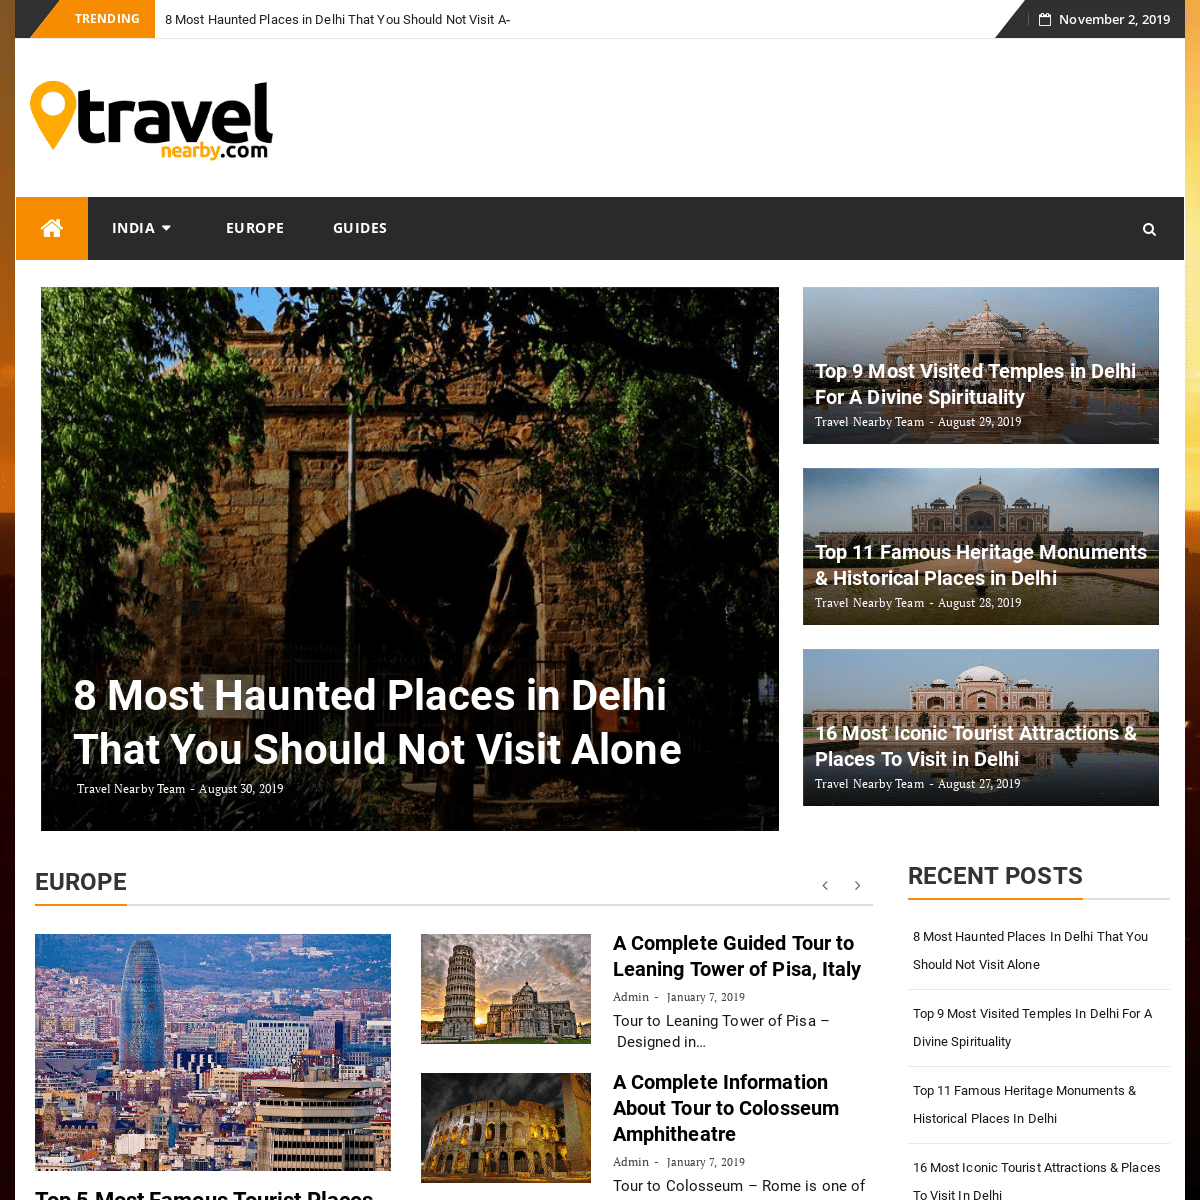 A complete backup of travelnearby.com